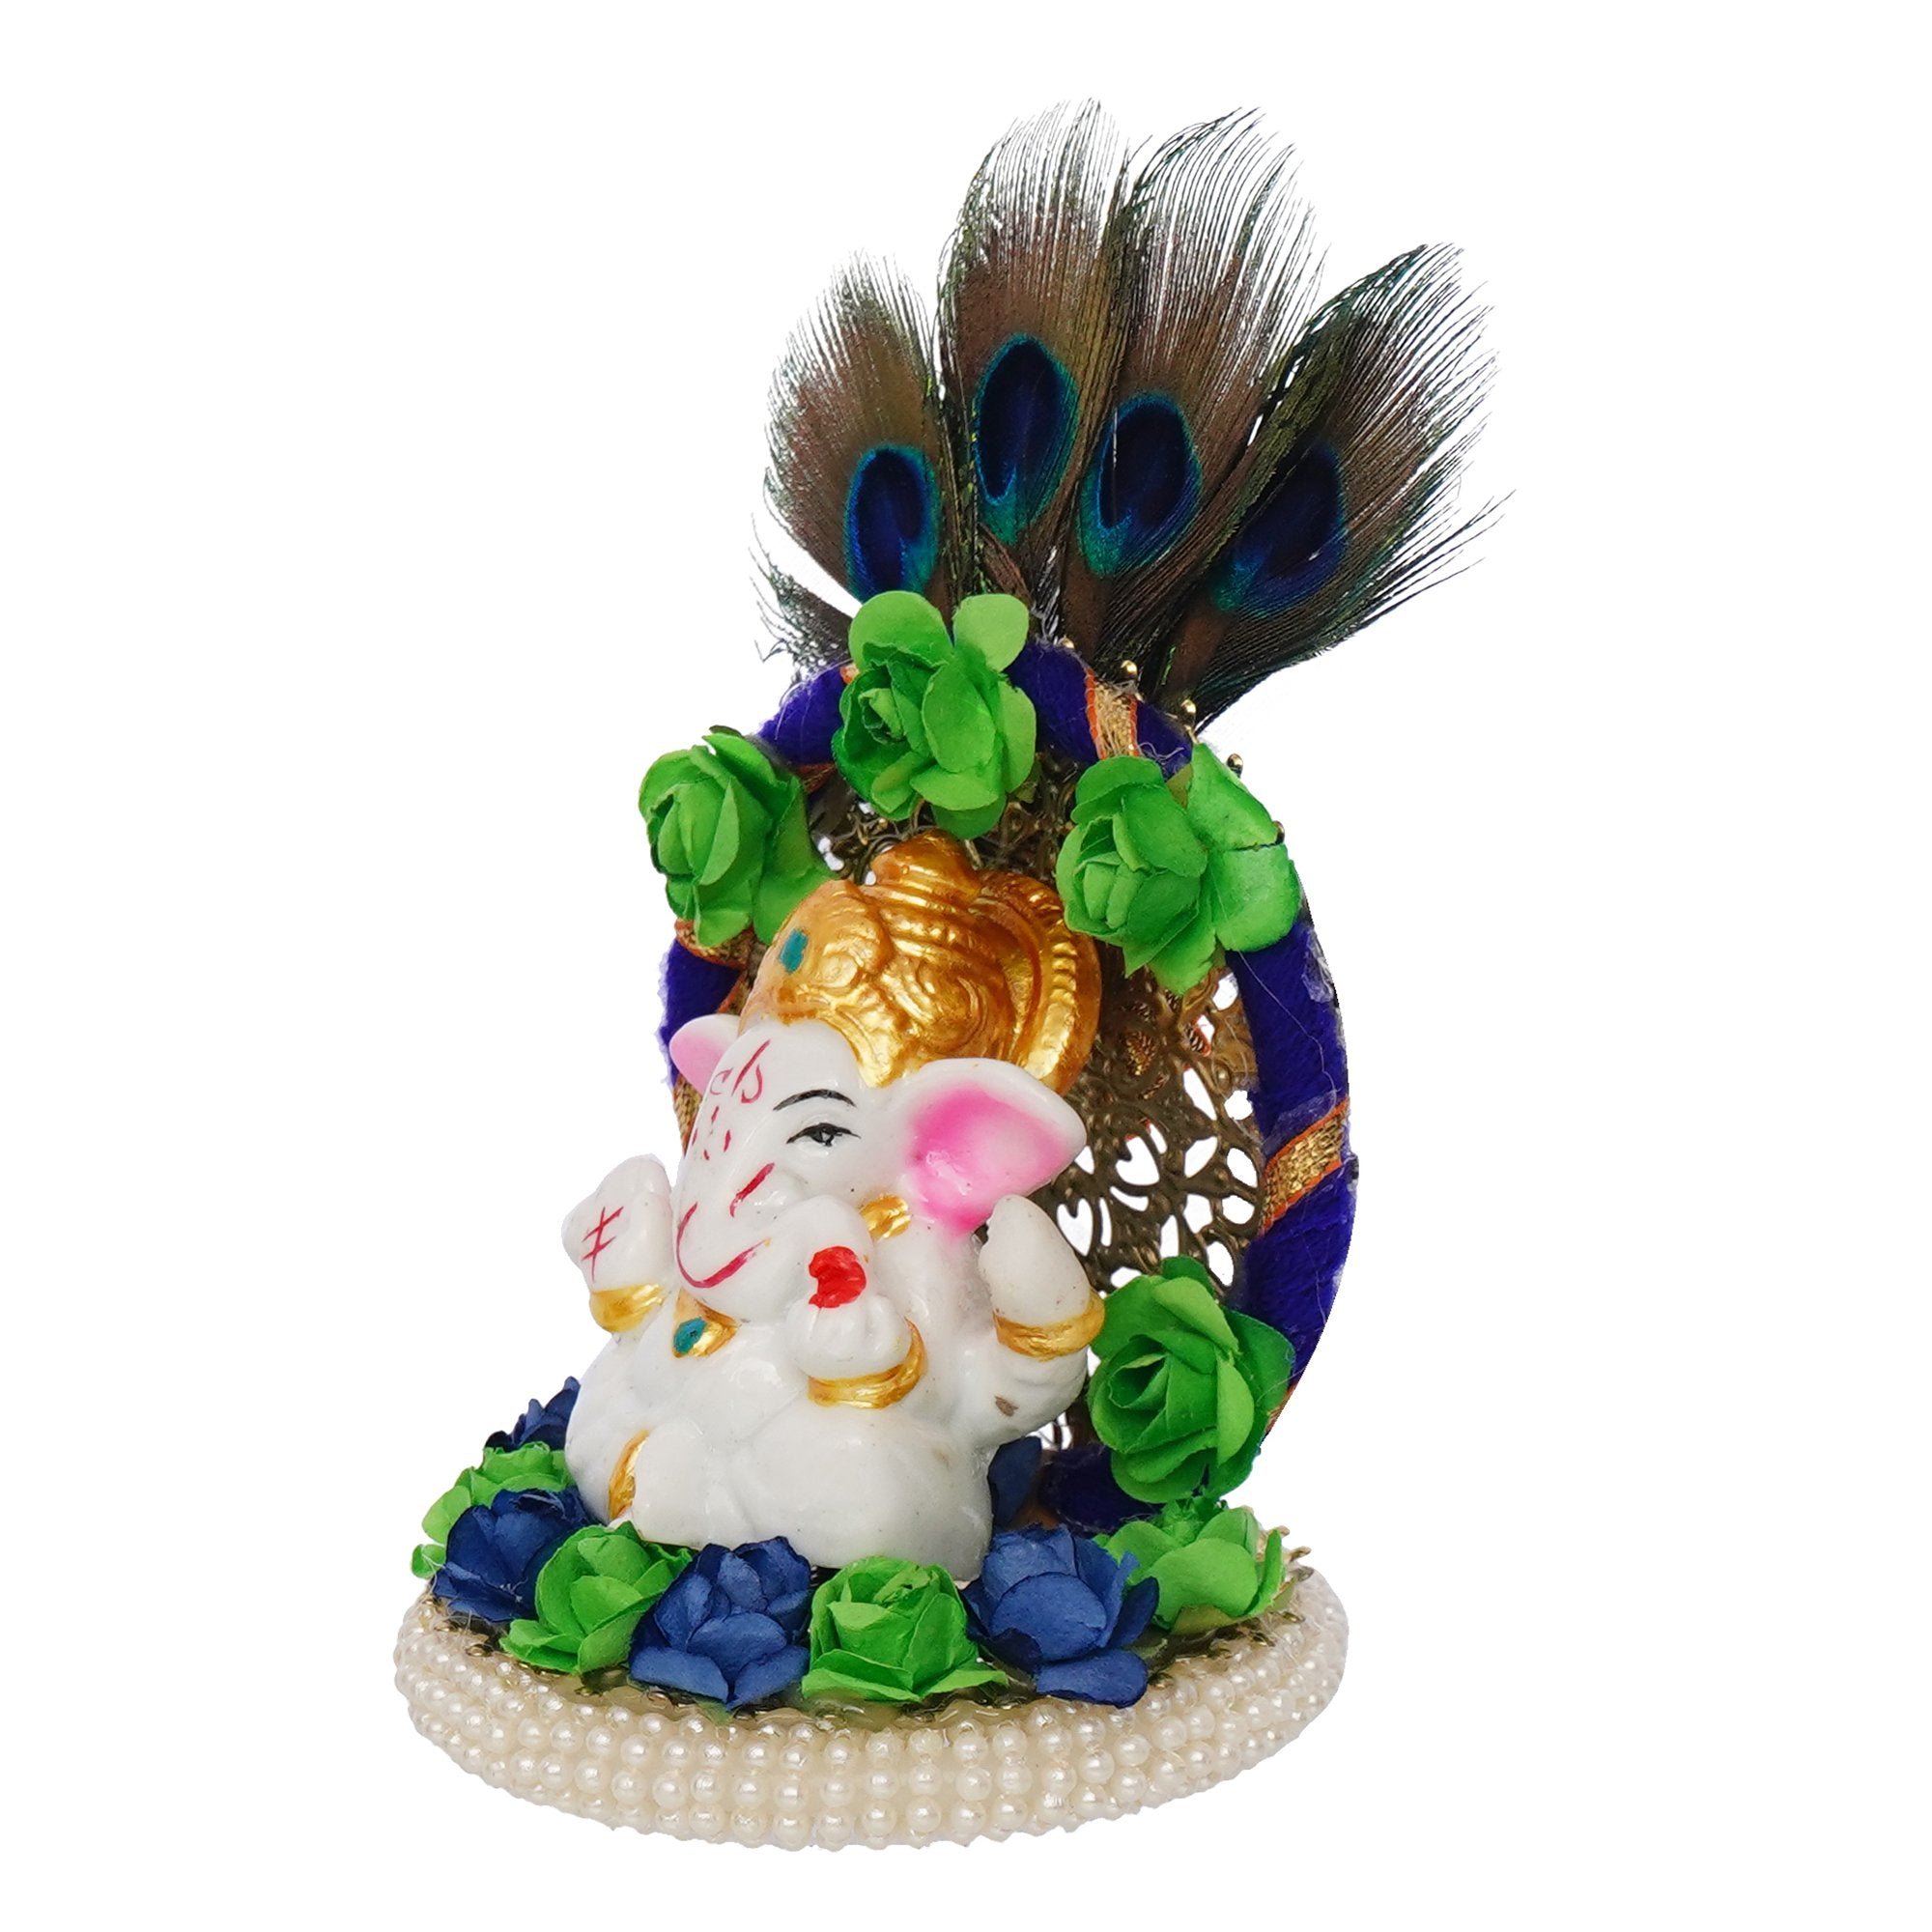 Polyresin Lord Ganesha Idol on Handcrafted Peacock Feather Floral Plate for Home and Car Dashboard 5